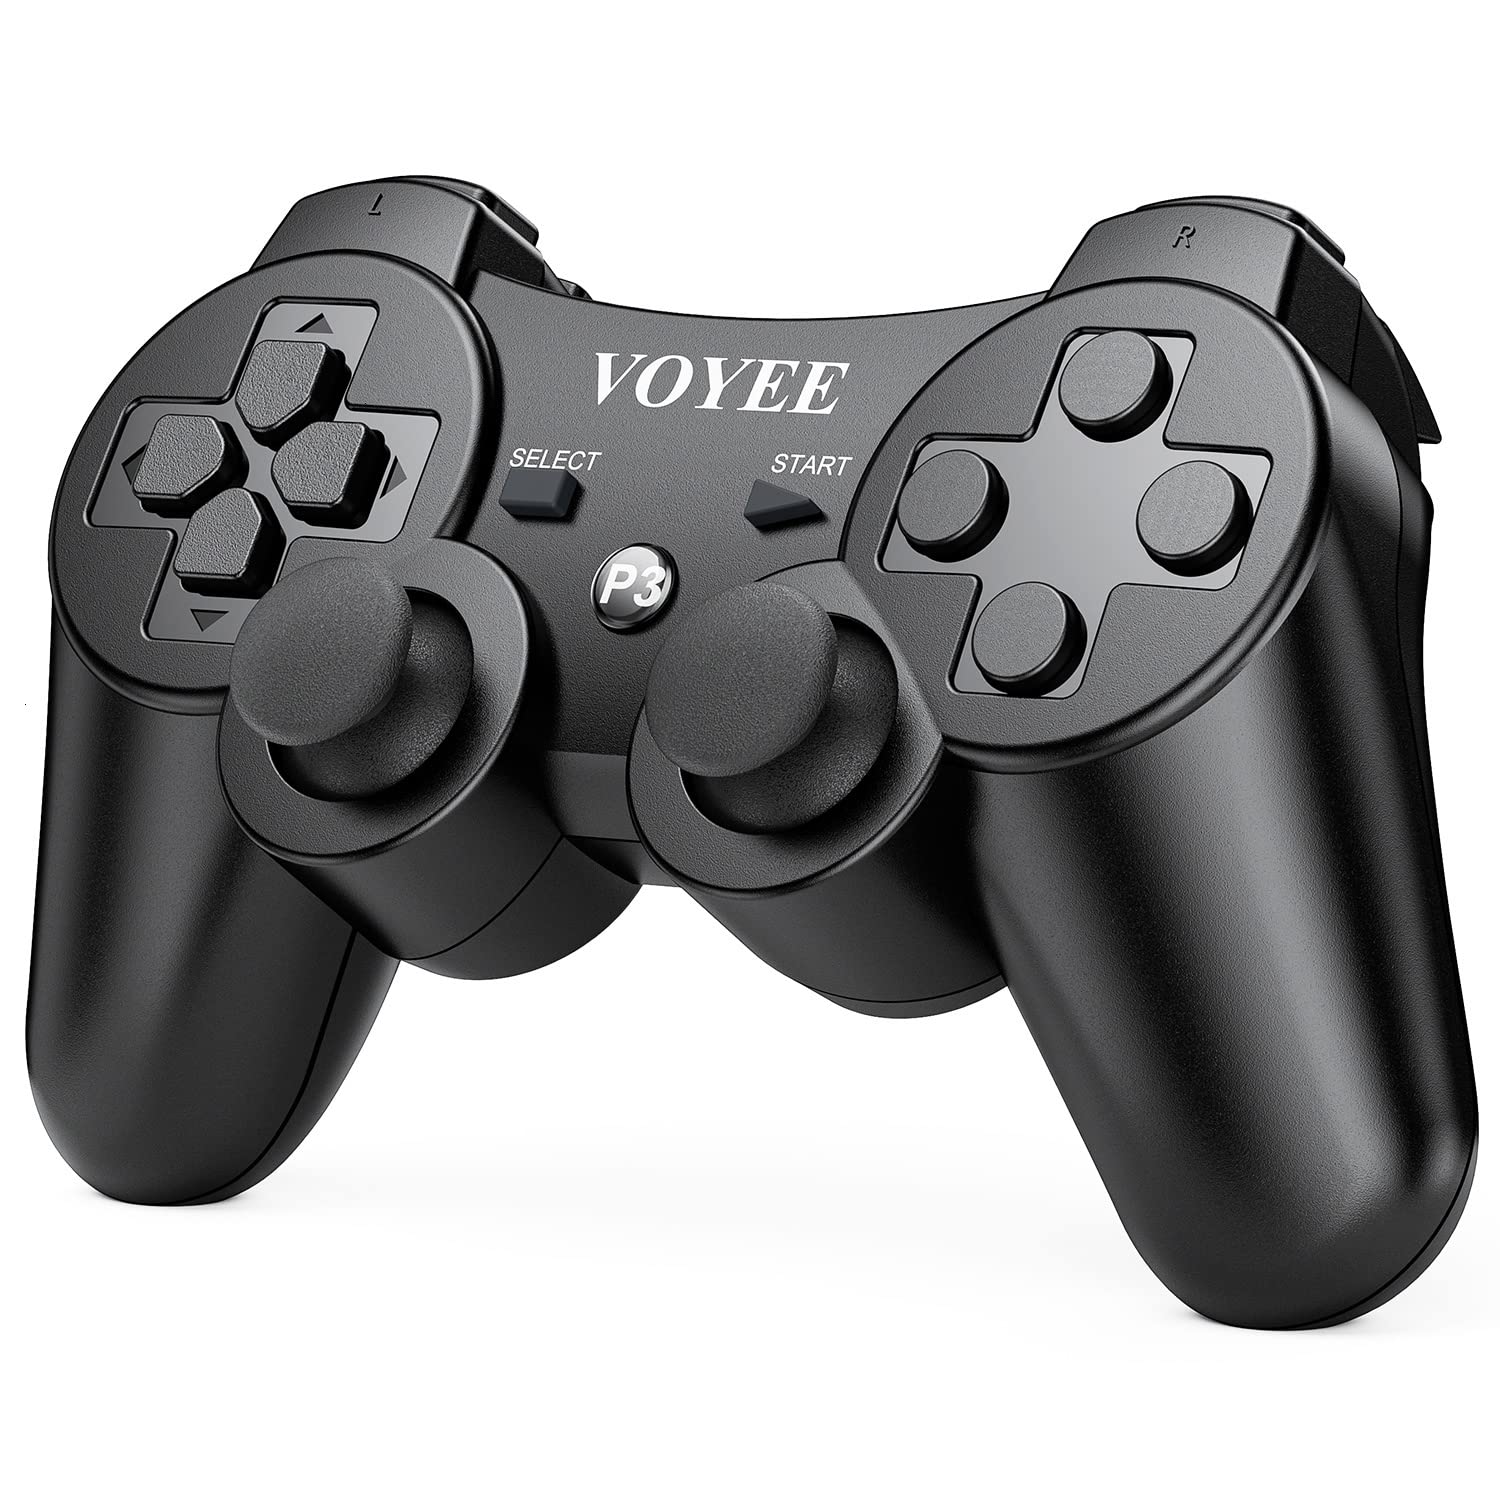 VOYEE Wireless Controller Compatible with Playstation 3, 2 Pack PS-3 Controller with Upgraded Joystick/Rechargerable Battery/Motion Control/Double Shock (Black)